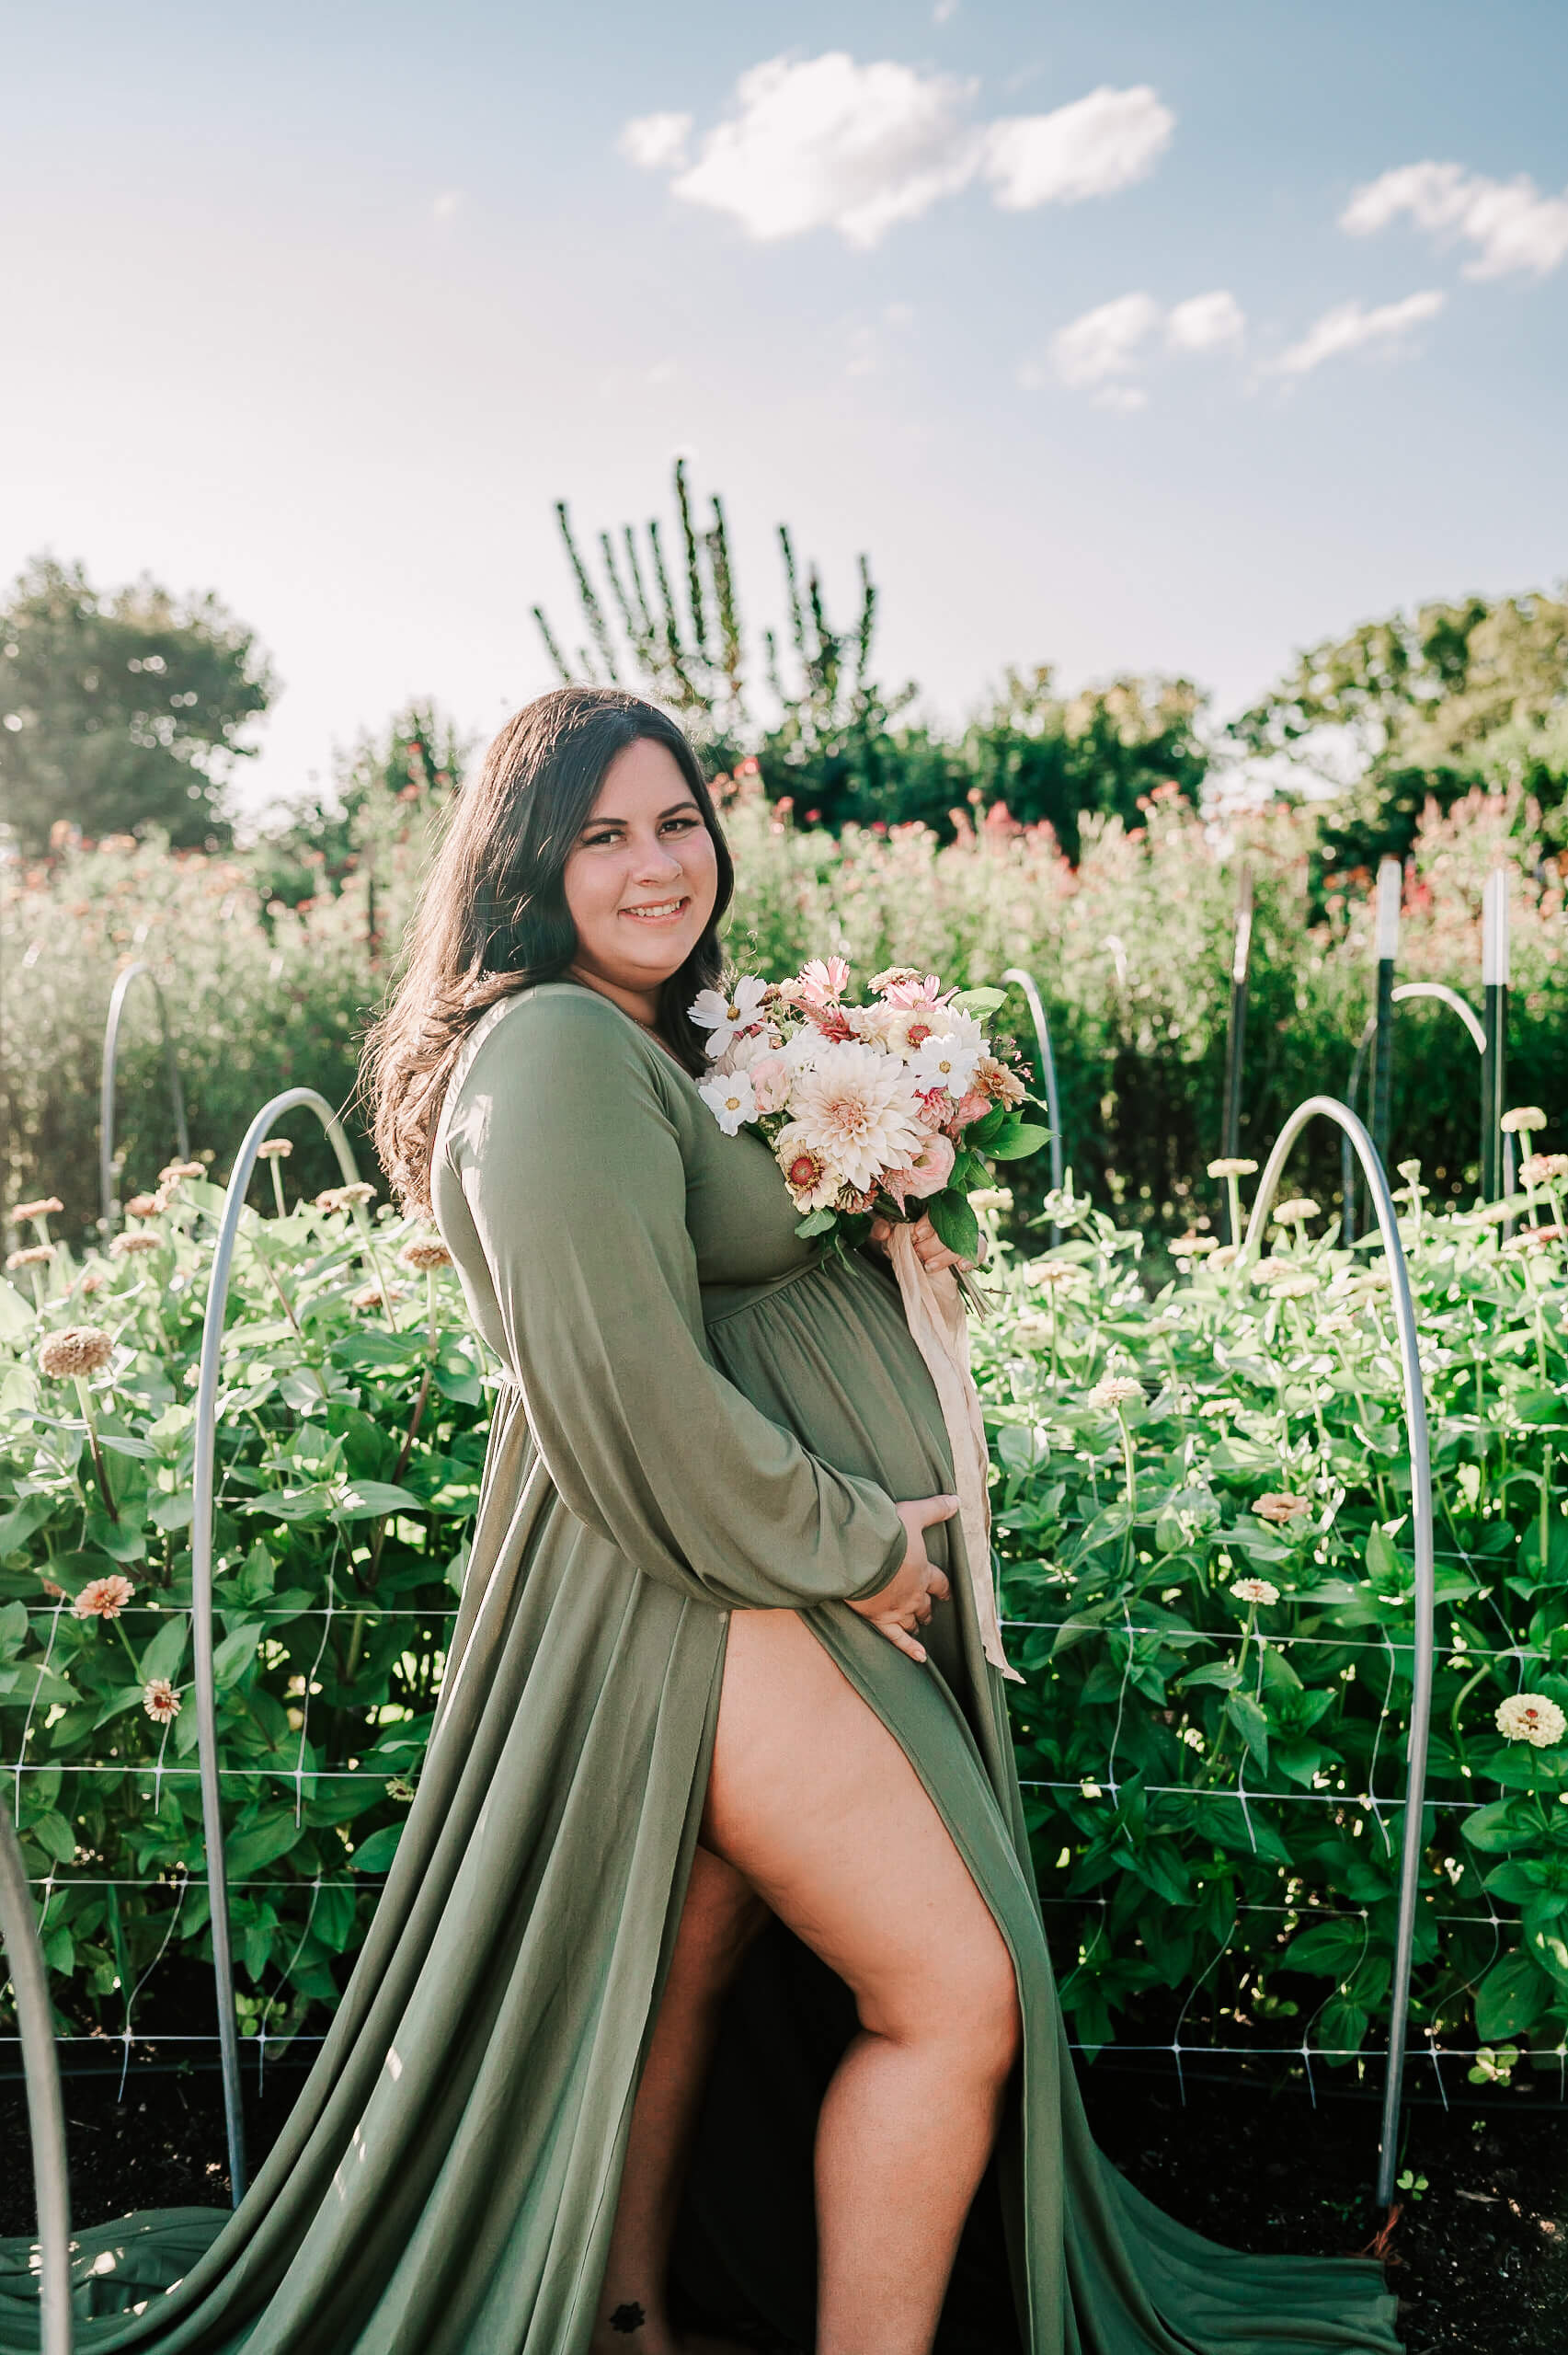 A mom to be in a green maternity gown holds a bouquet of pink and white flowers while standing in a flower garden